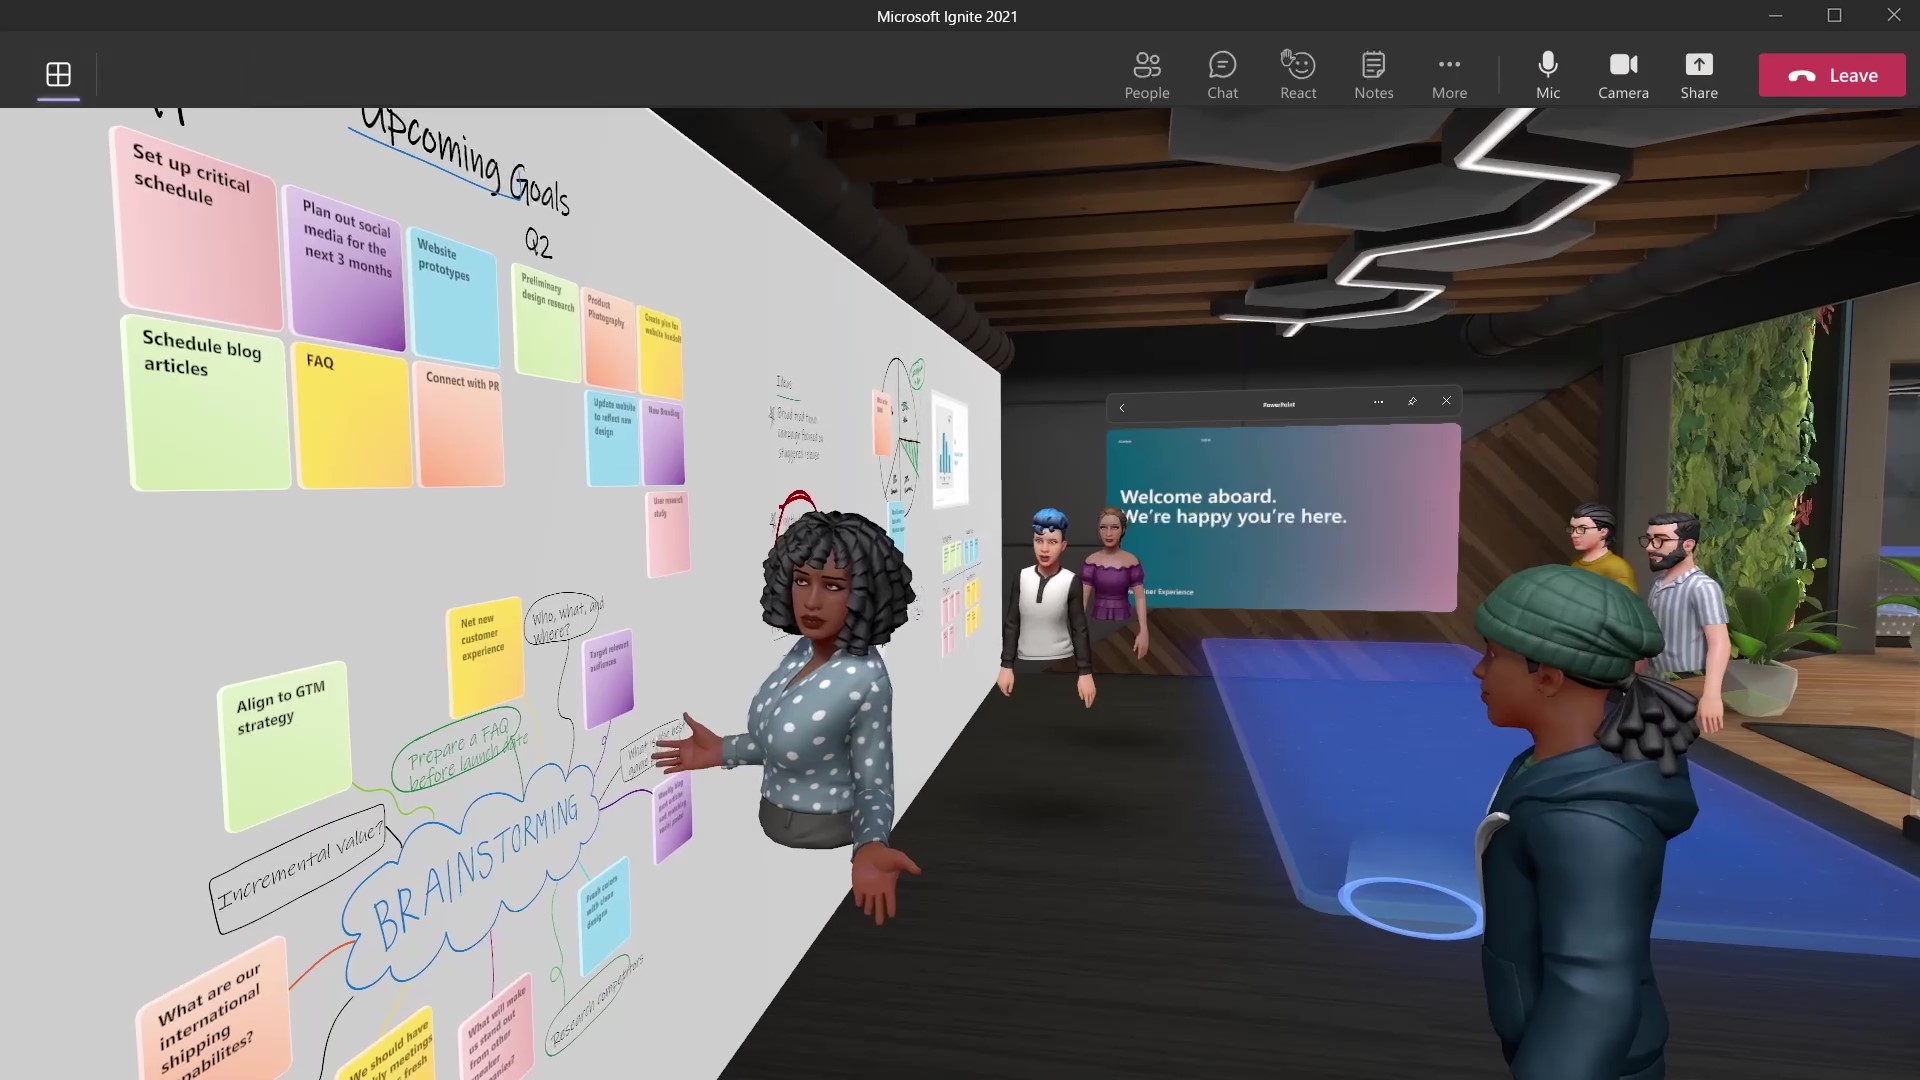 Microsoft ventures into the metaverse with Mesh